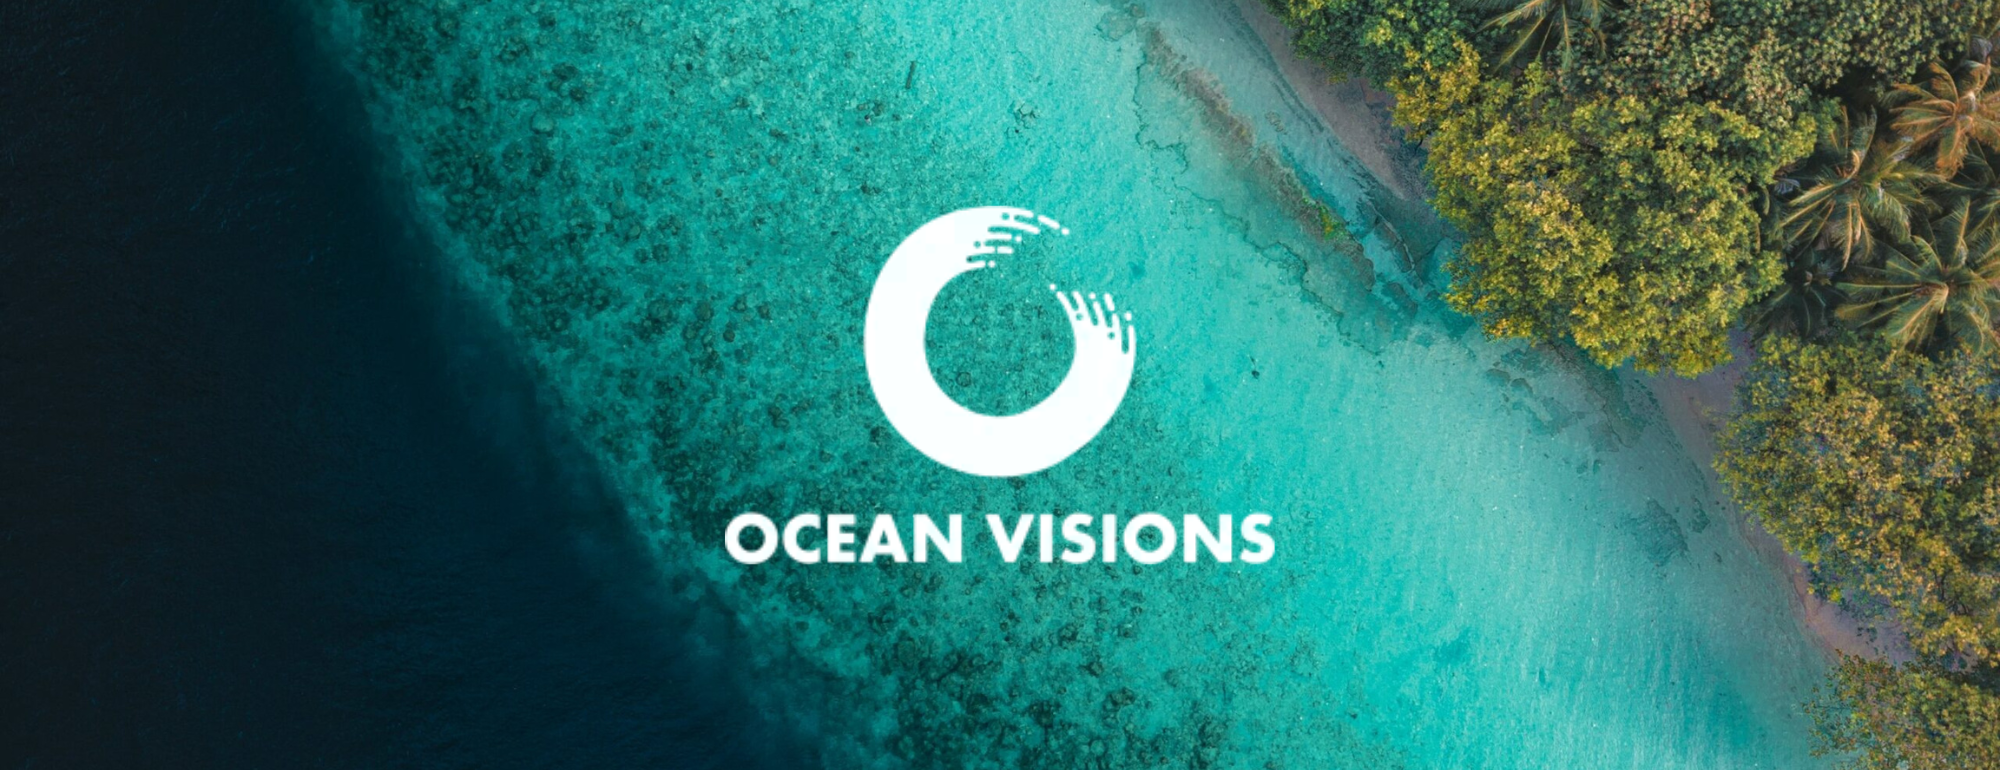 Coastal overhead shot in the background. Ocean Visions logo in the foreground.